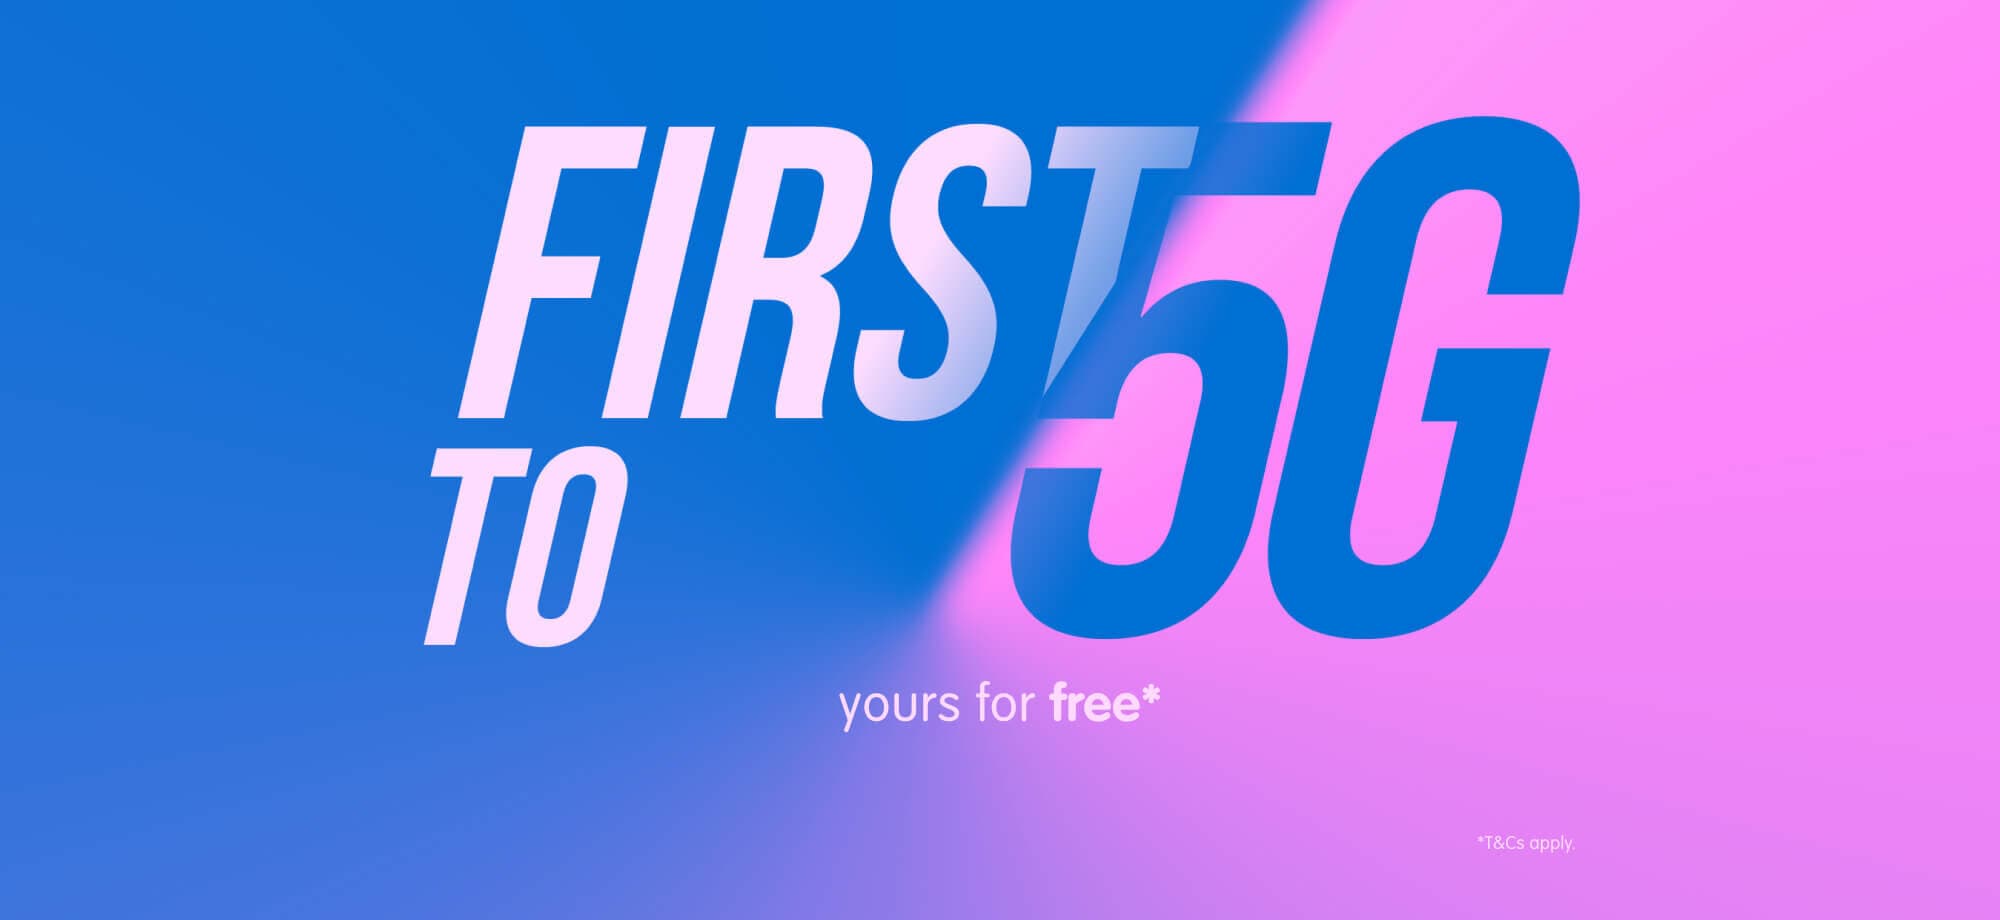 YES 5G Featured